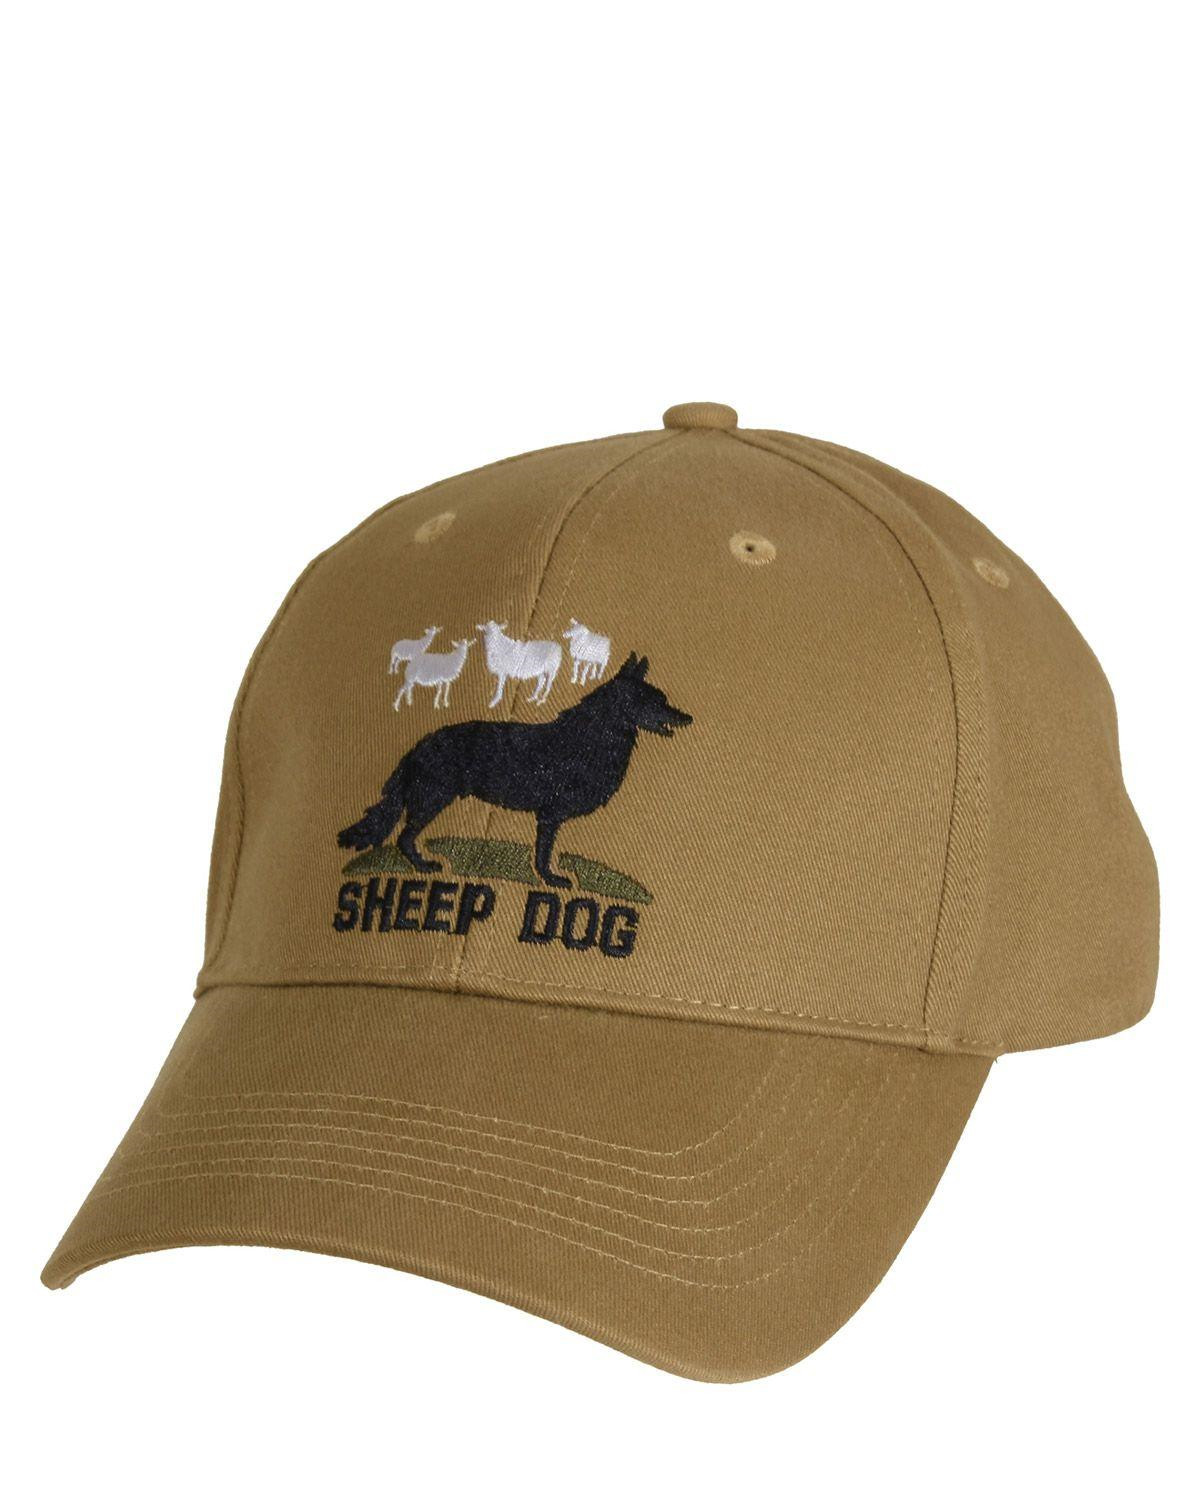 Rothco Deluxe Baseball Cap - Sheep Dog (Coyote Brun, One Size)